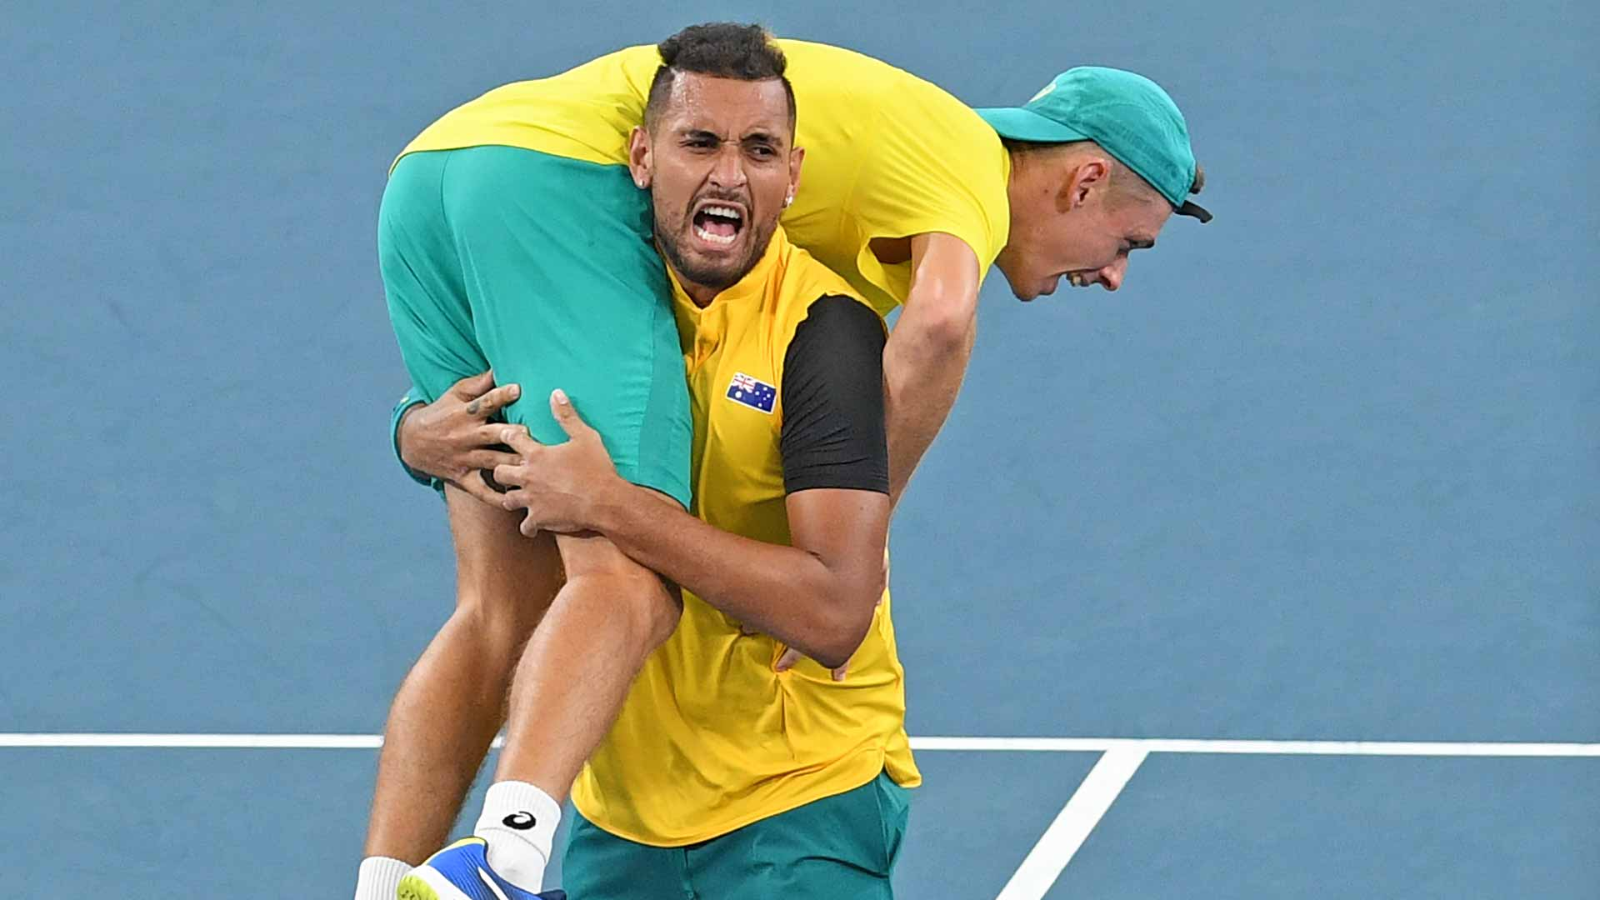 Australia Set To Appear In New ‘United Cup’ Tennis Tournament In Sydney